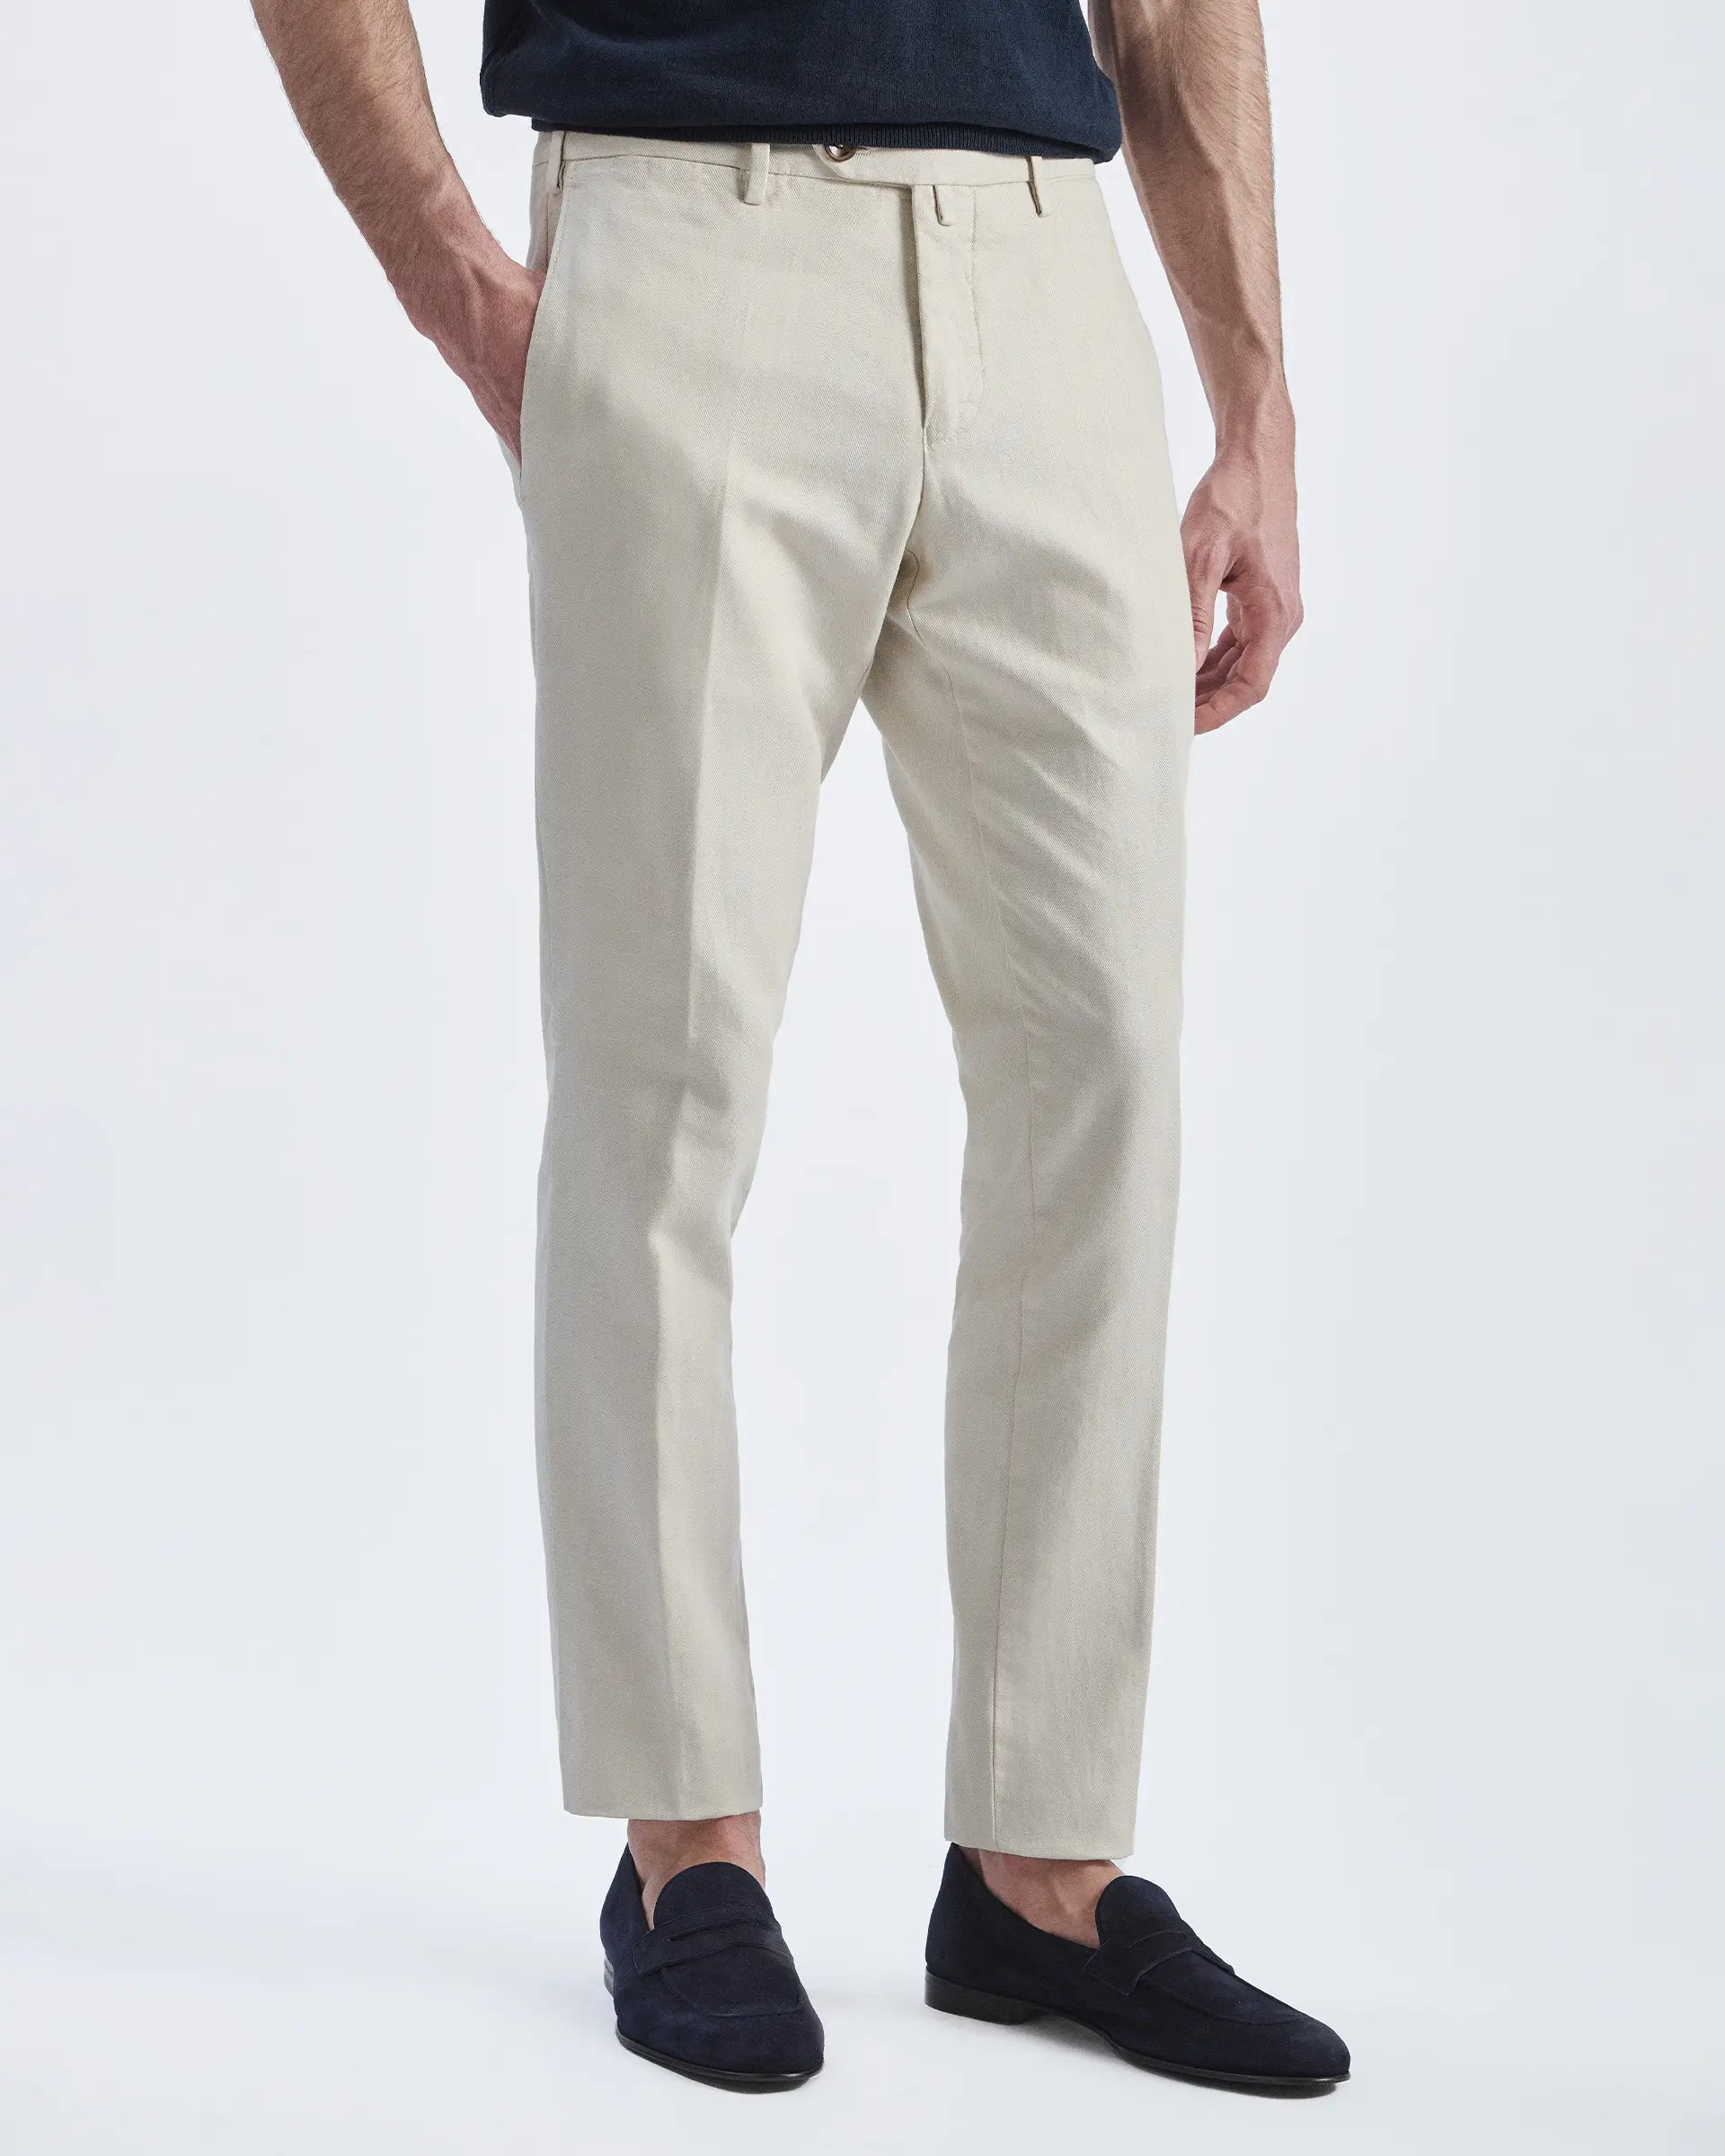 Beige Linen and Cotton Stretch Pants